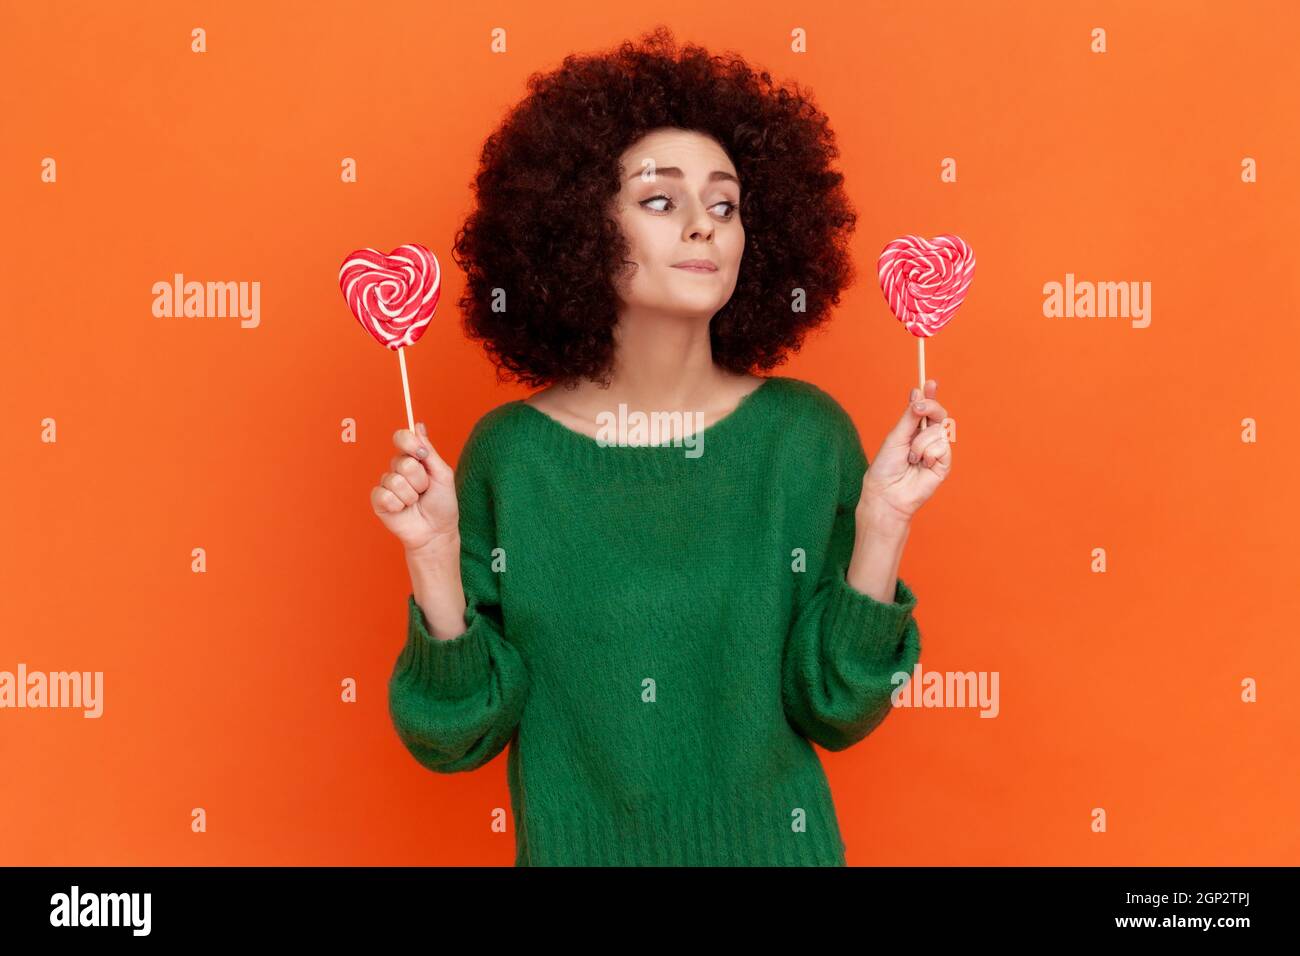 Attractive woman with Afro hairstyle wearing green casual style sweater keeping diet, decides eat candy or not, looking at sweets. Indoor studio shot isolated on orange background. Stock Photo